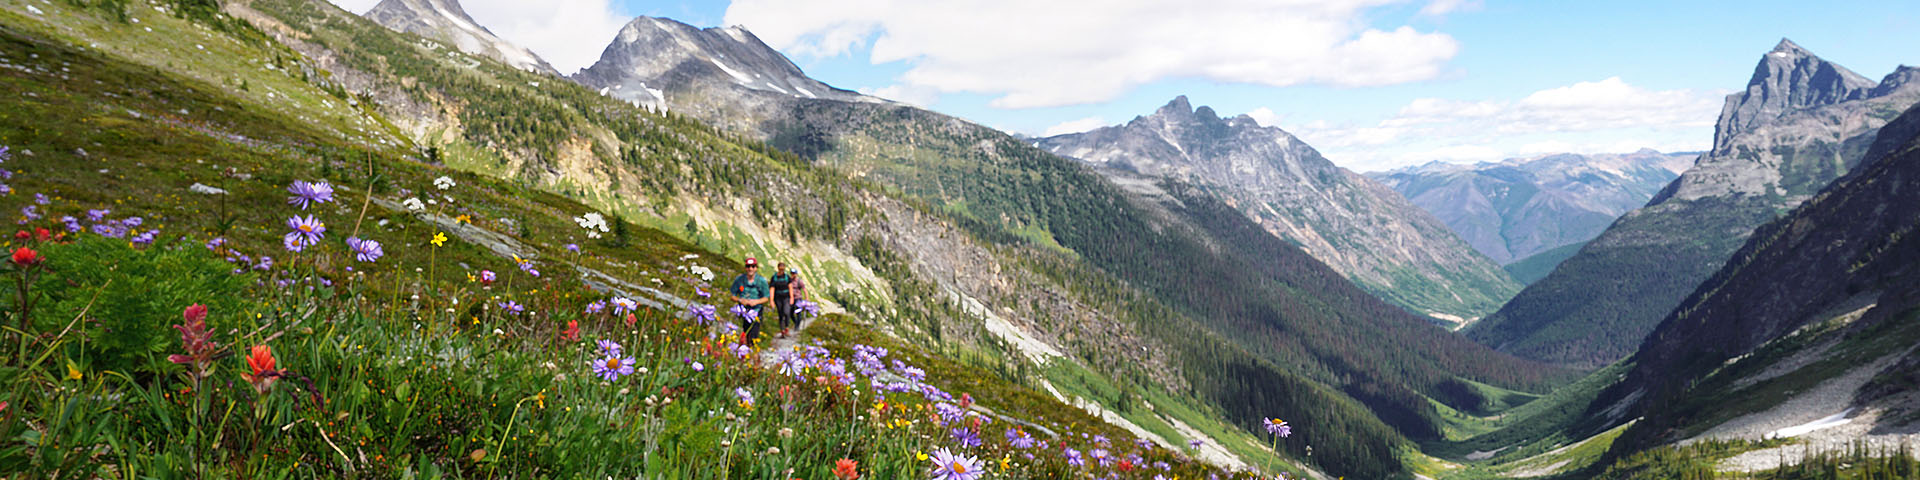 Two hikers waling in flower filled alpine meadows in Glacier national park